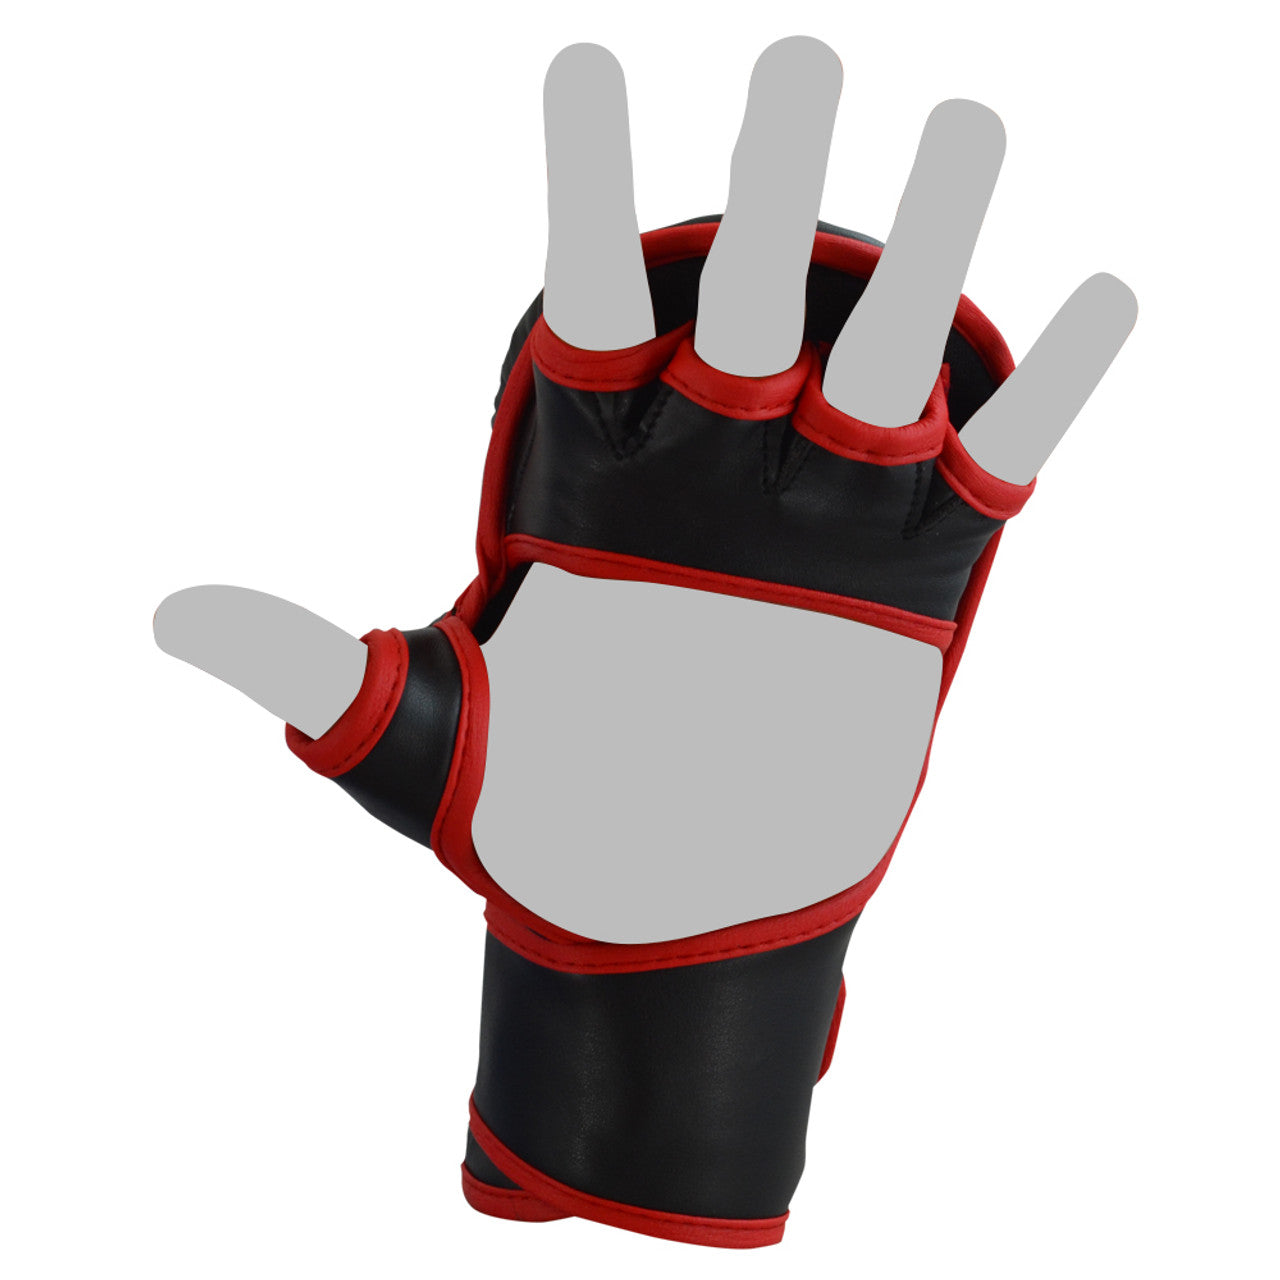 Youngstar Youth MMA Training Gloves